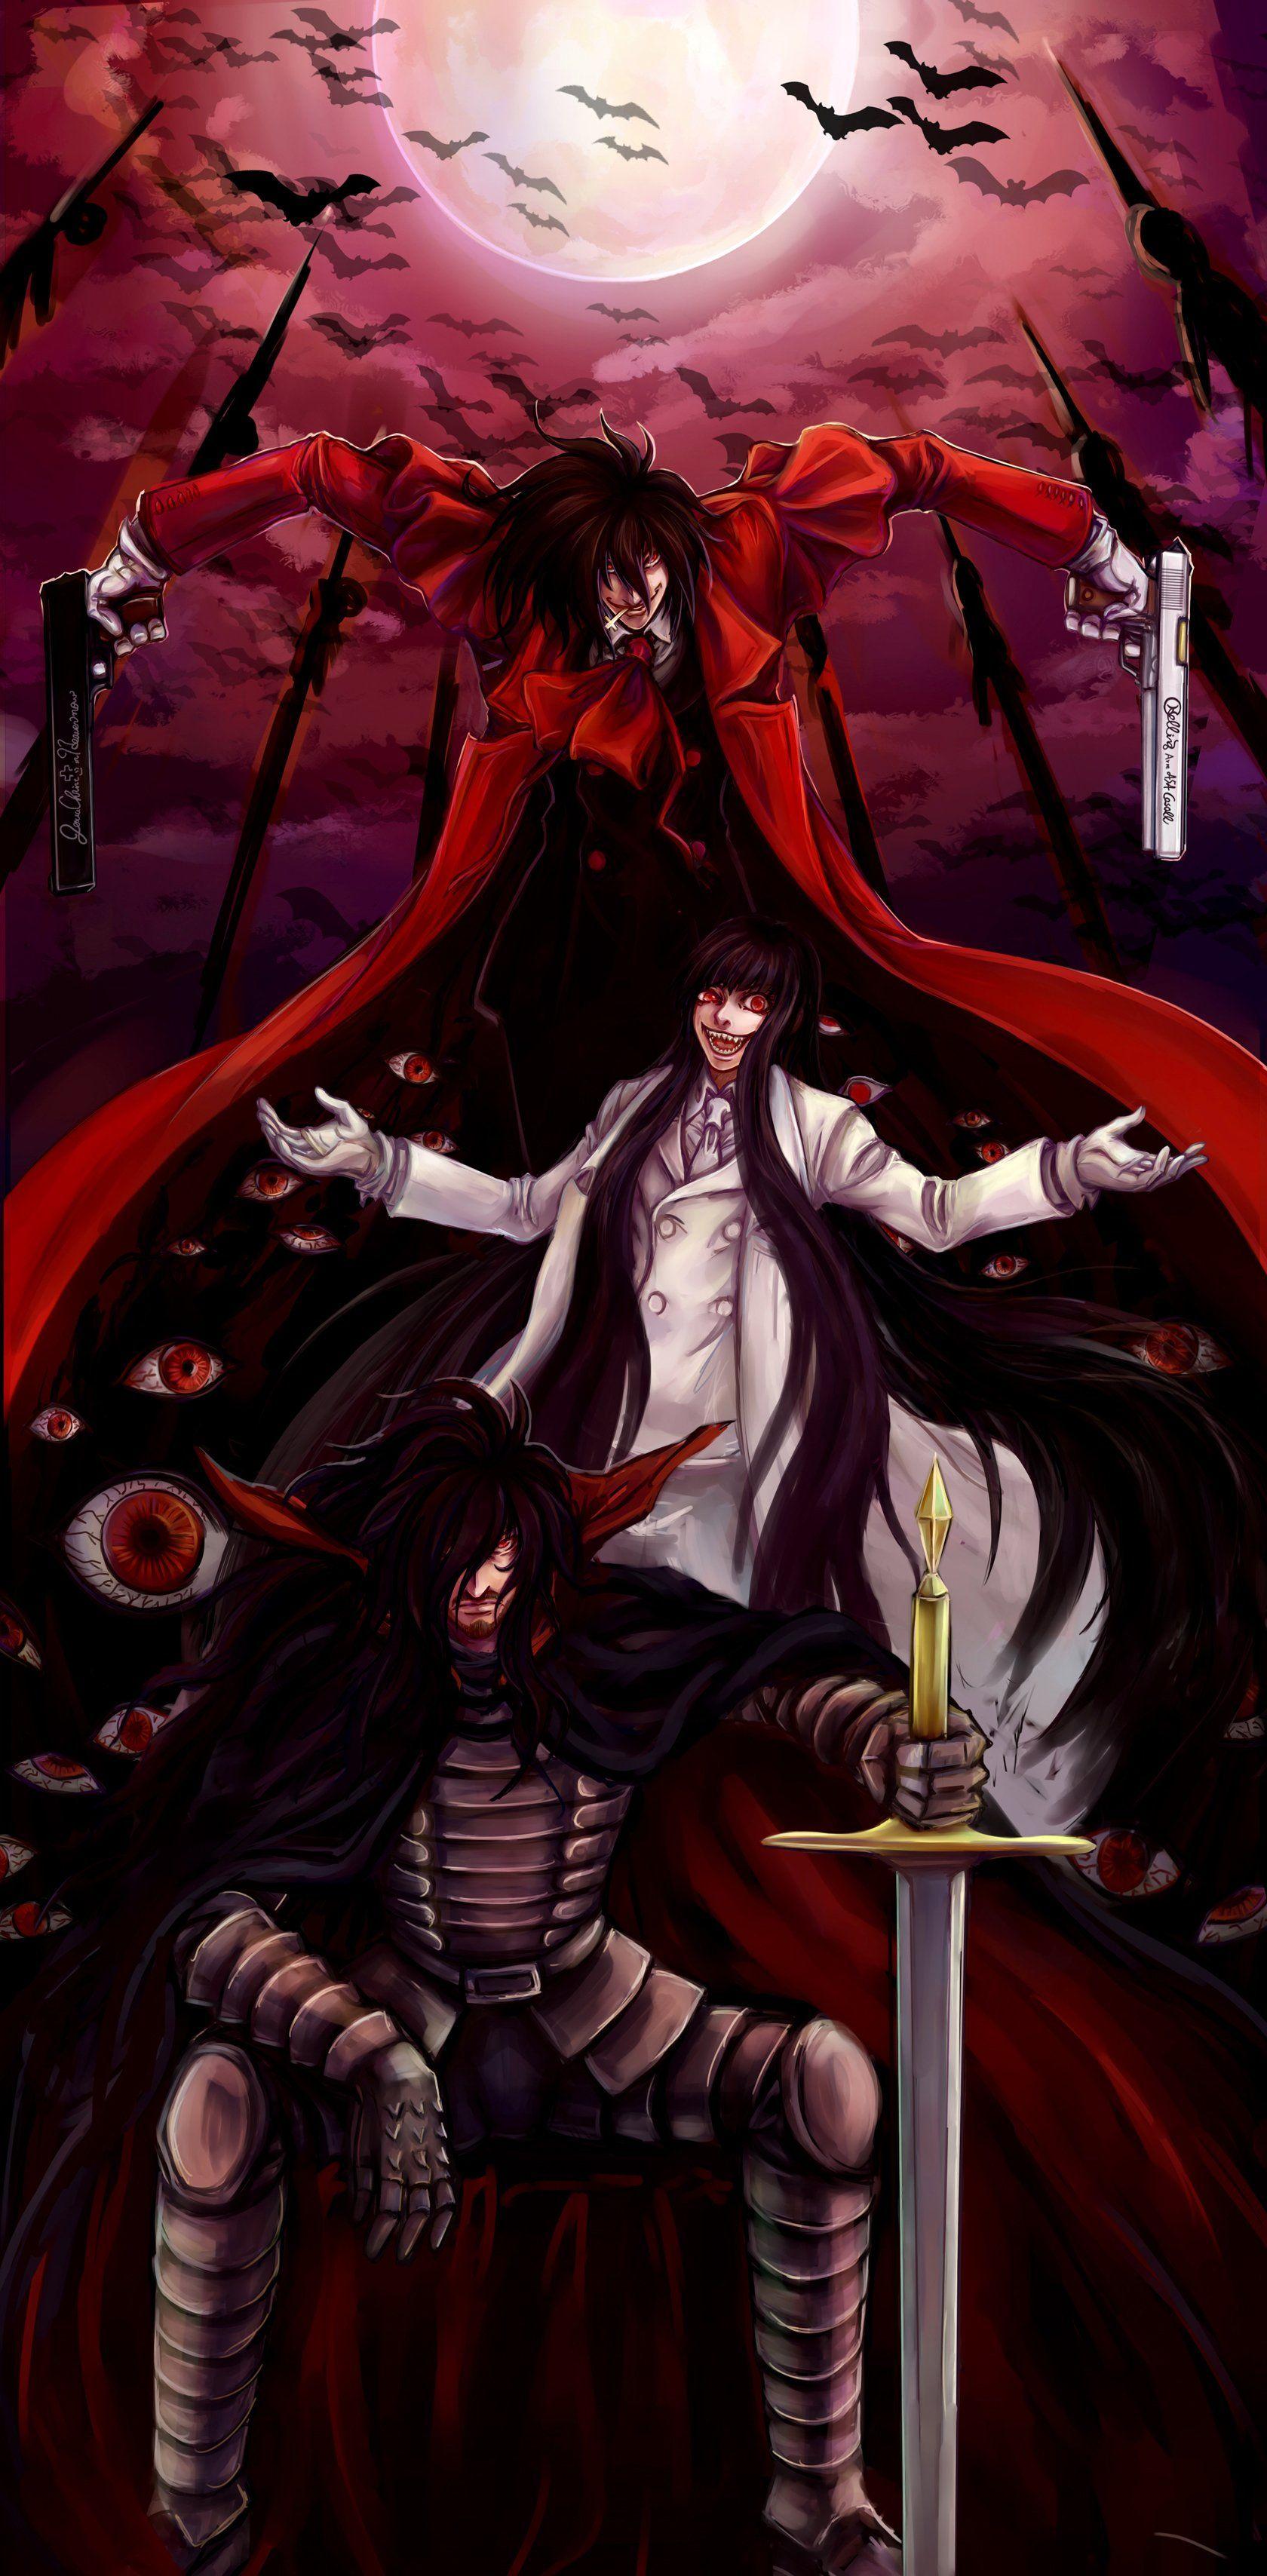 Hellsing Anime Wallpapers Top Free Hellsing Anime Backgrounds Wallpaperaccess